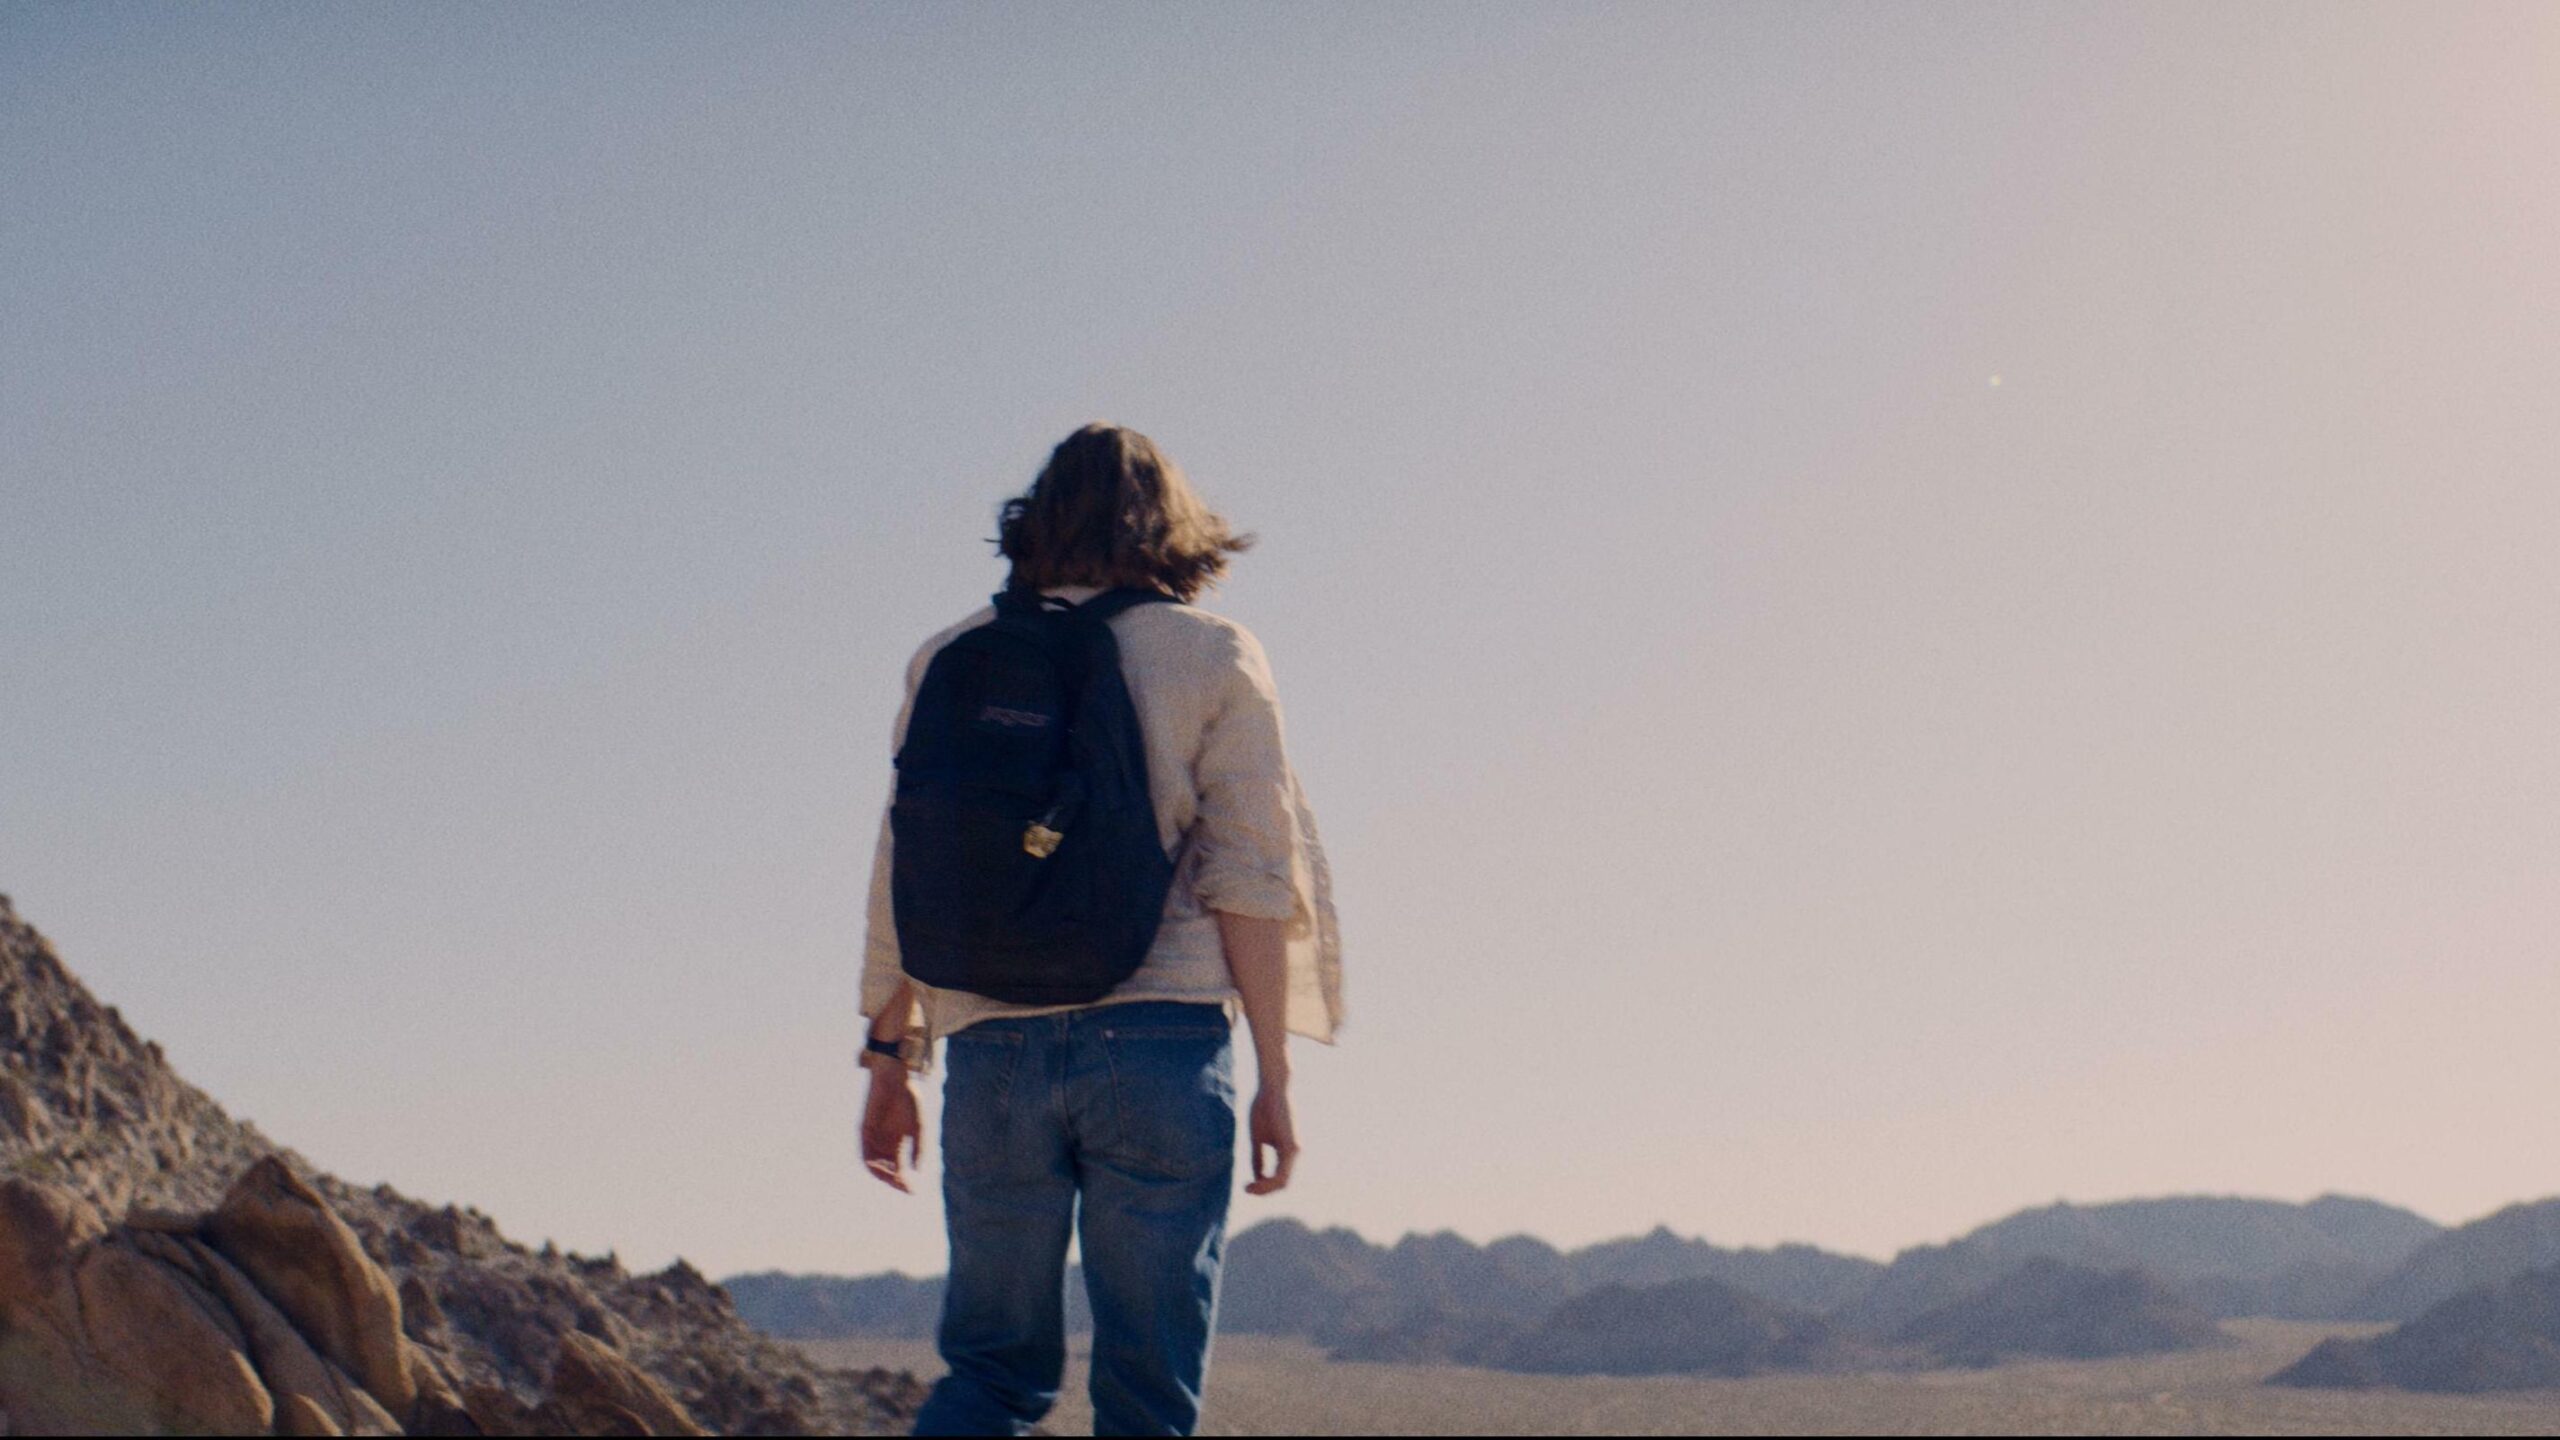 The woman (Kristine Froseth) looks out across the vast desert before her, with no hope in sight.